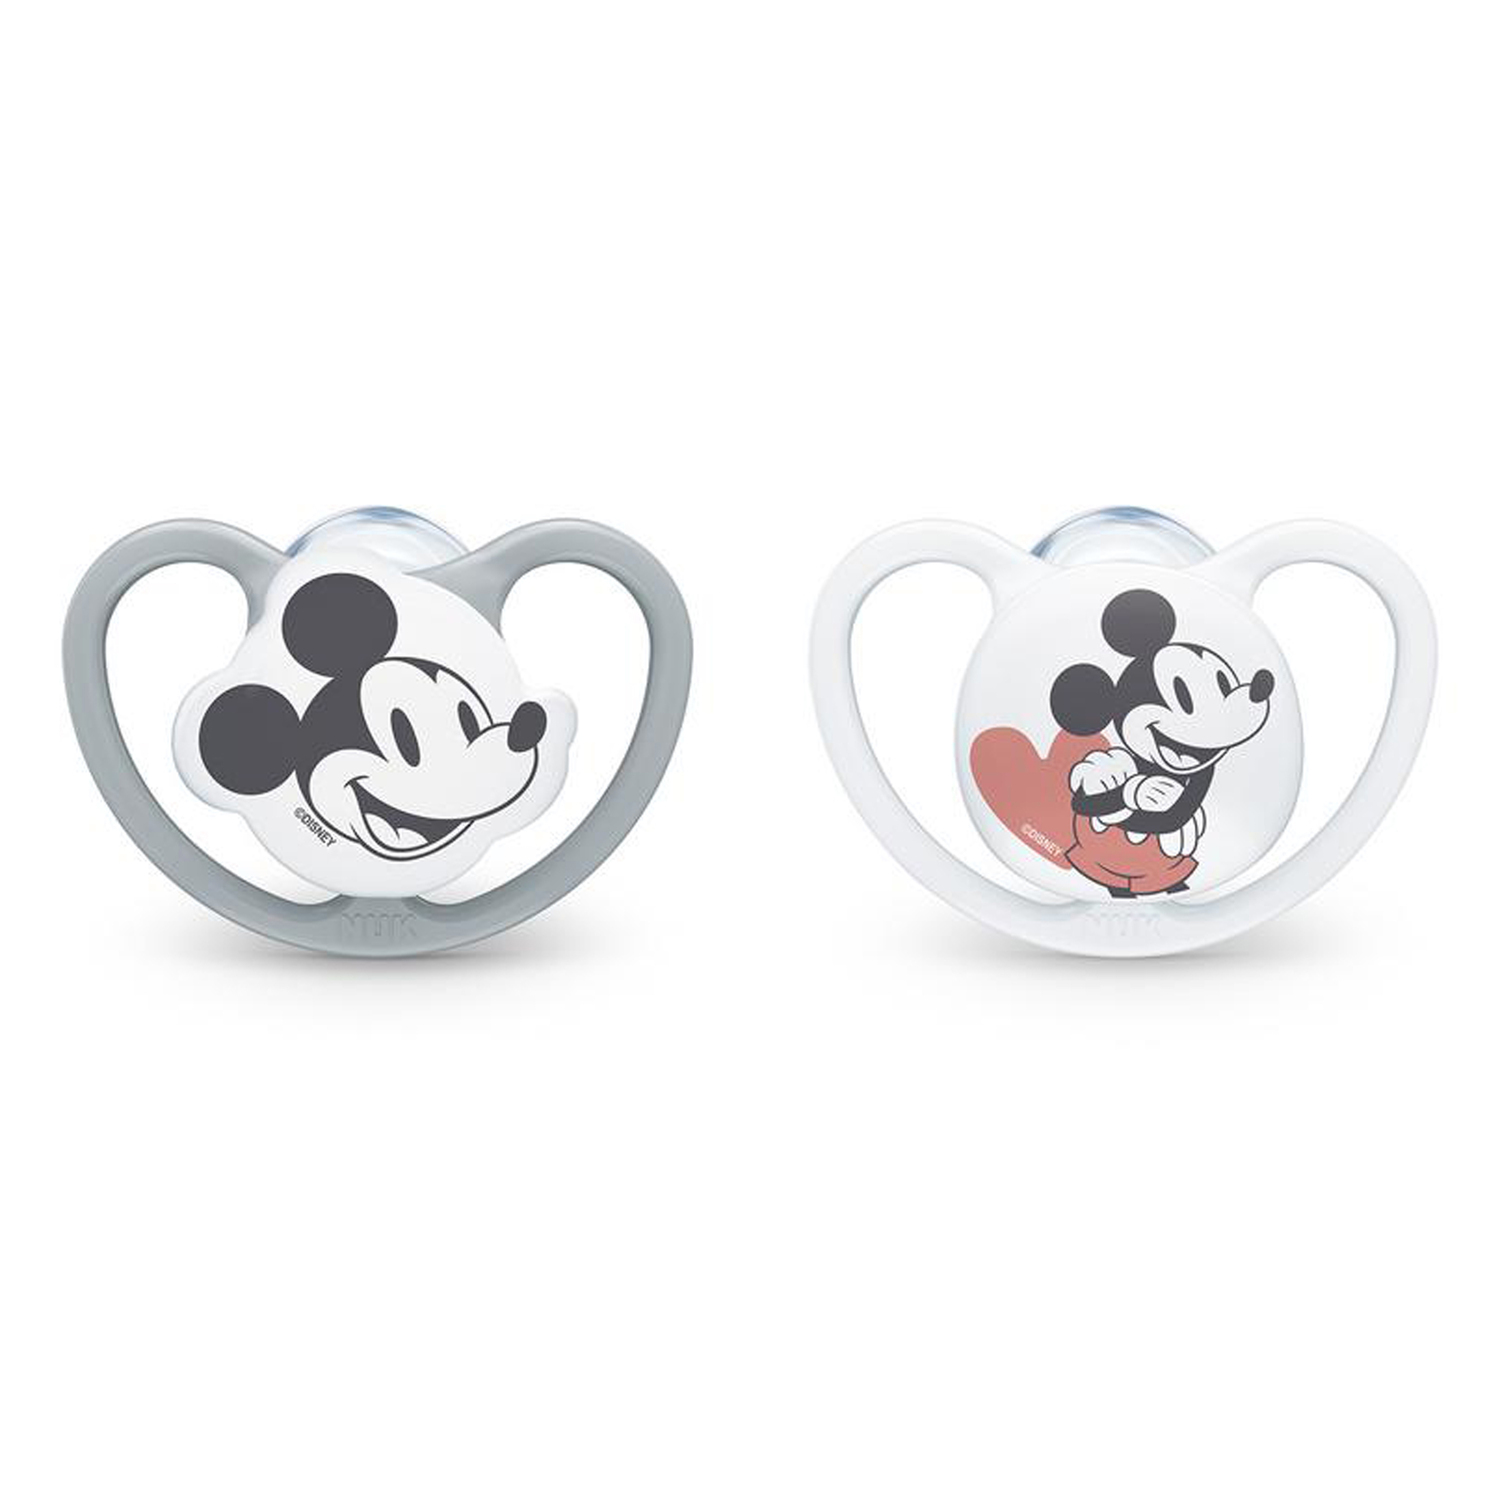 NUK® Disney Mickey Space Pacifier, Size 1, 2pk – Mixed Product Image 1 of 8